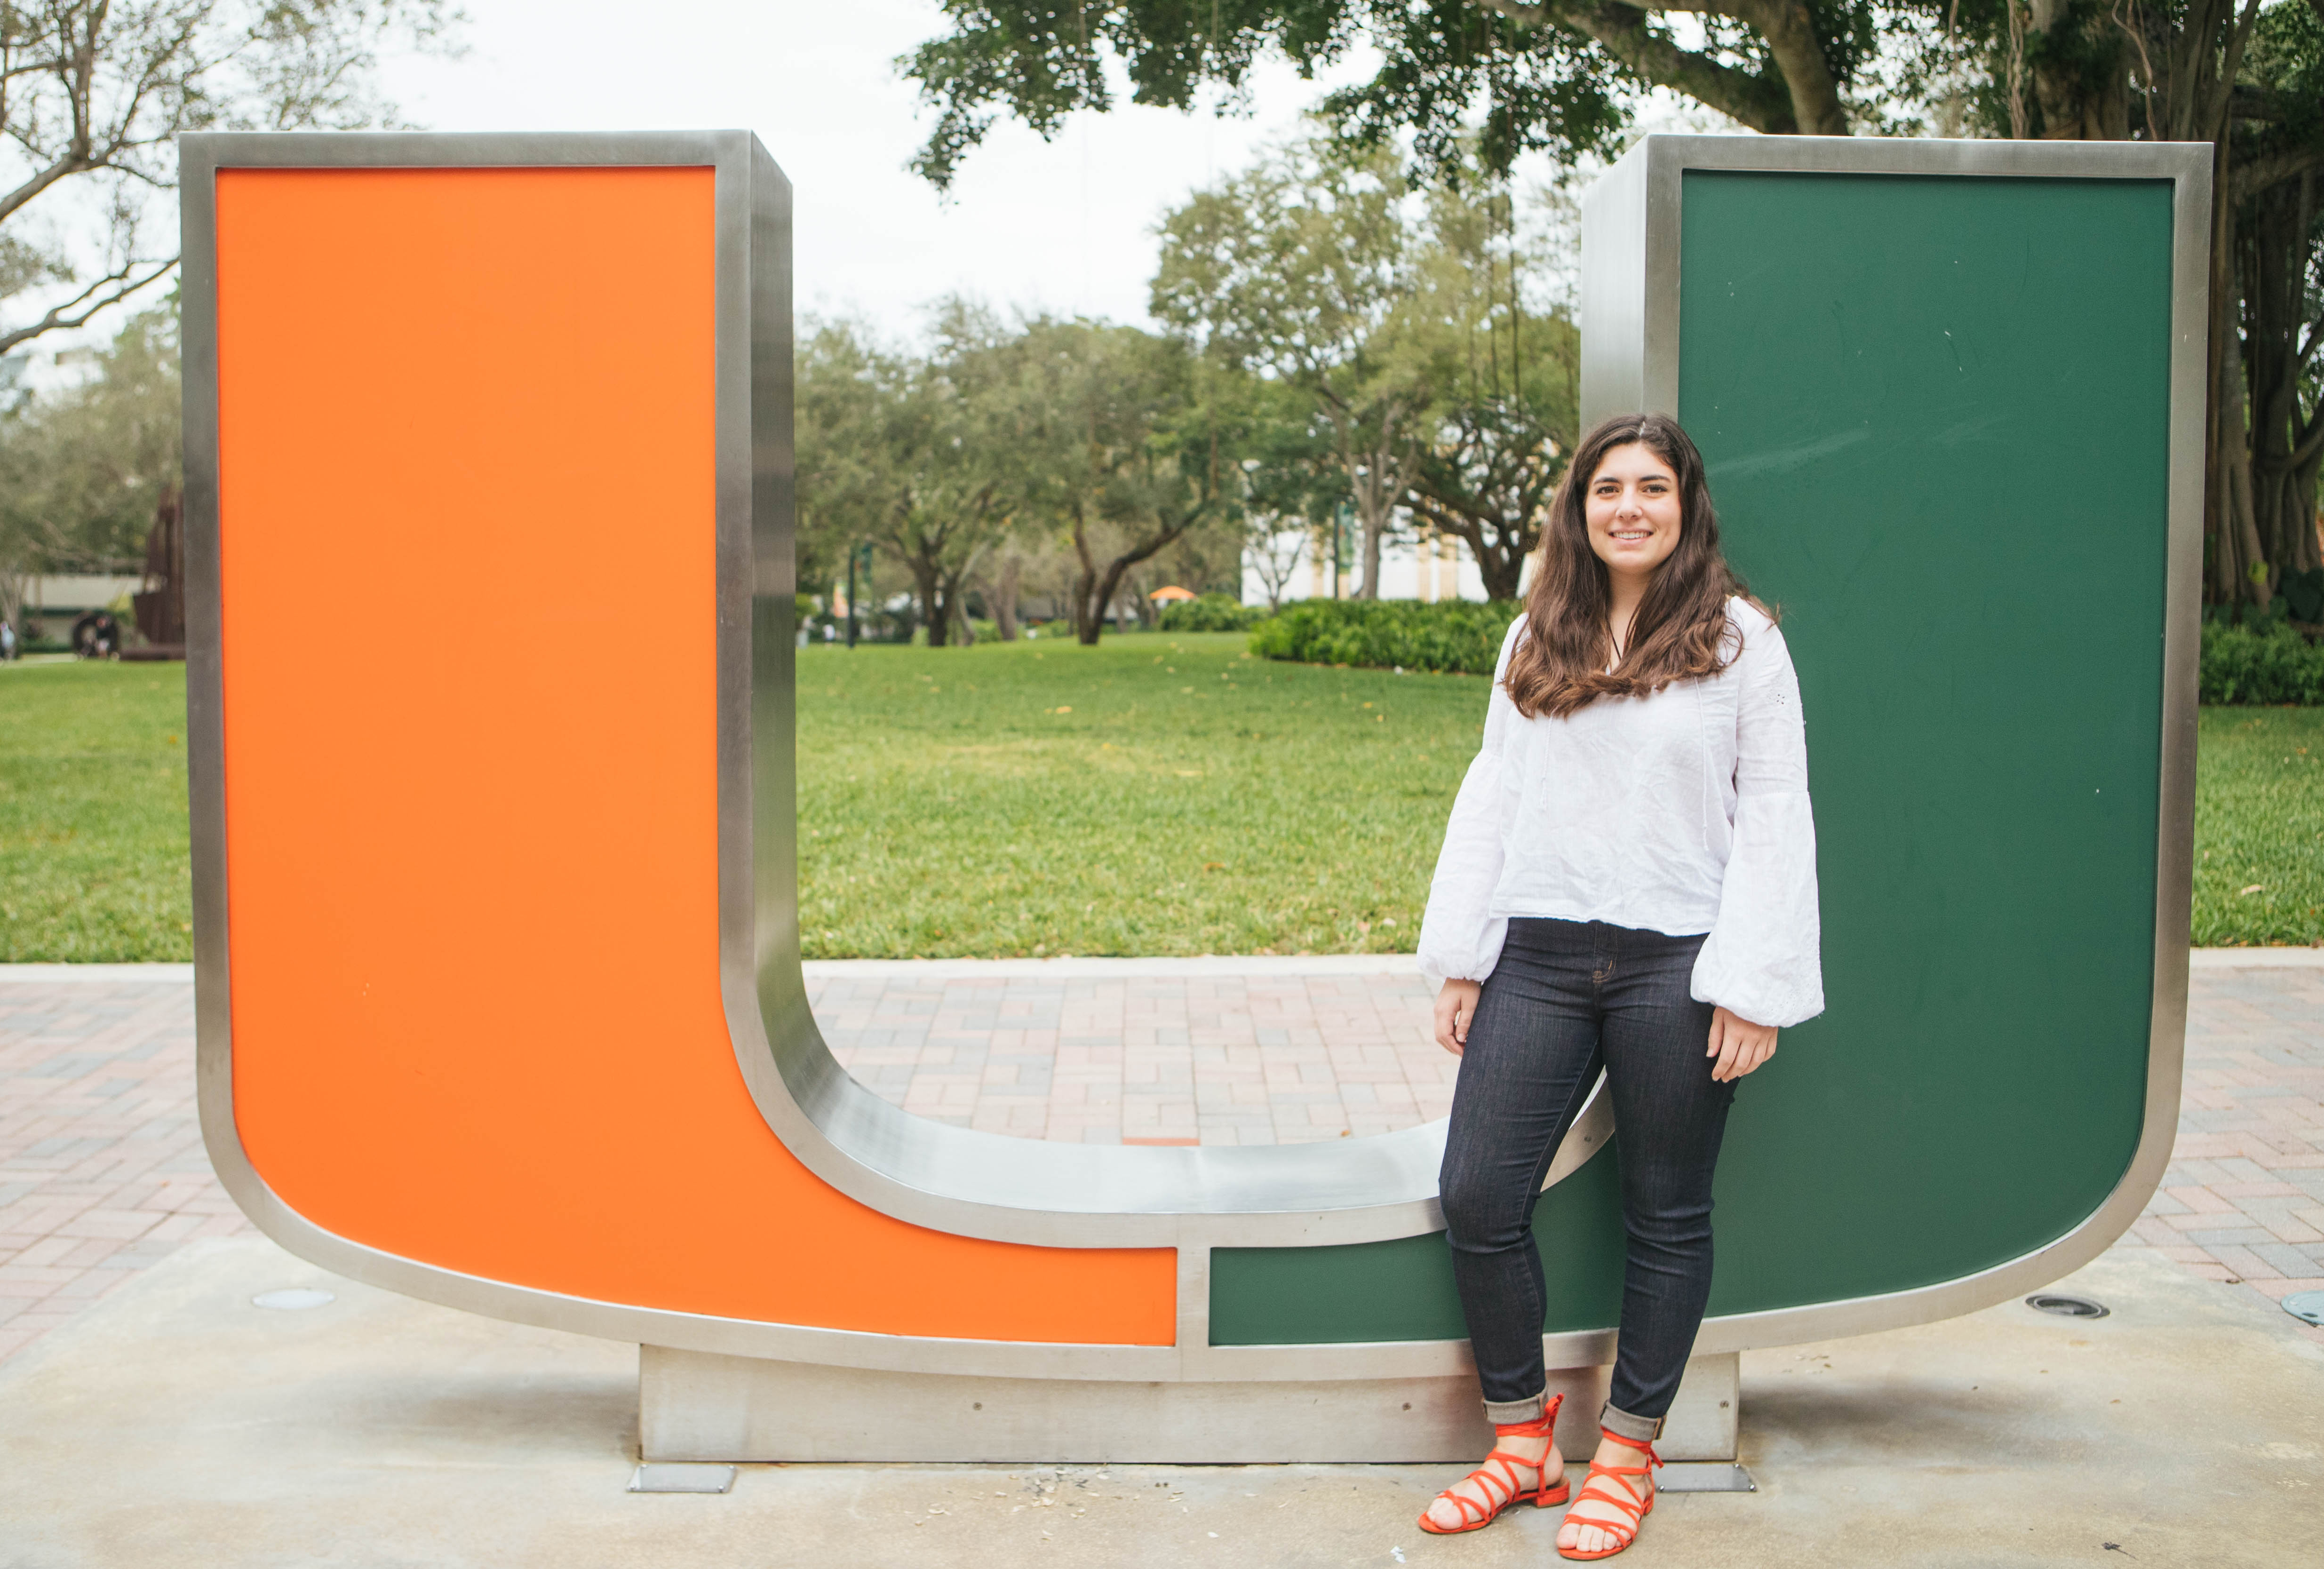 Student standing in front of a statue of the "U" Miami logo.